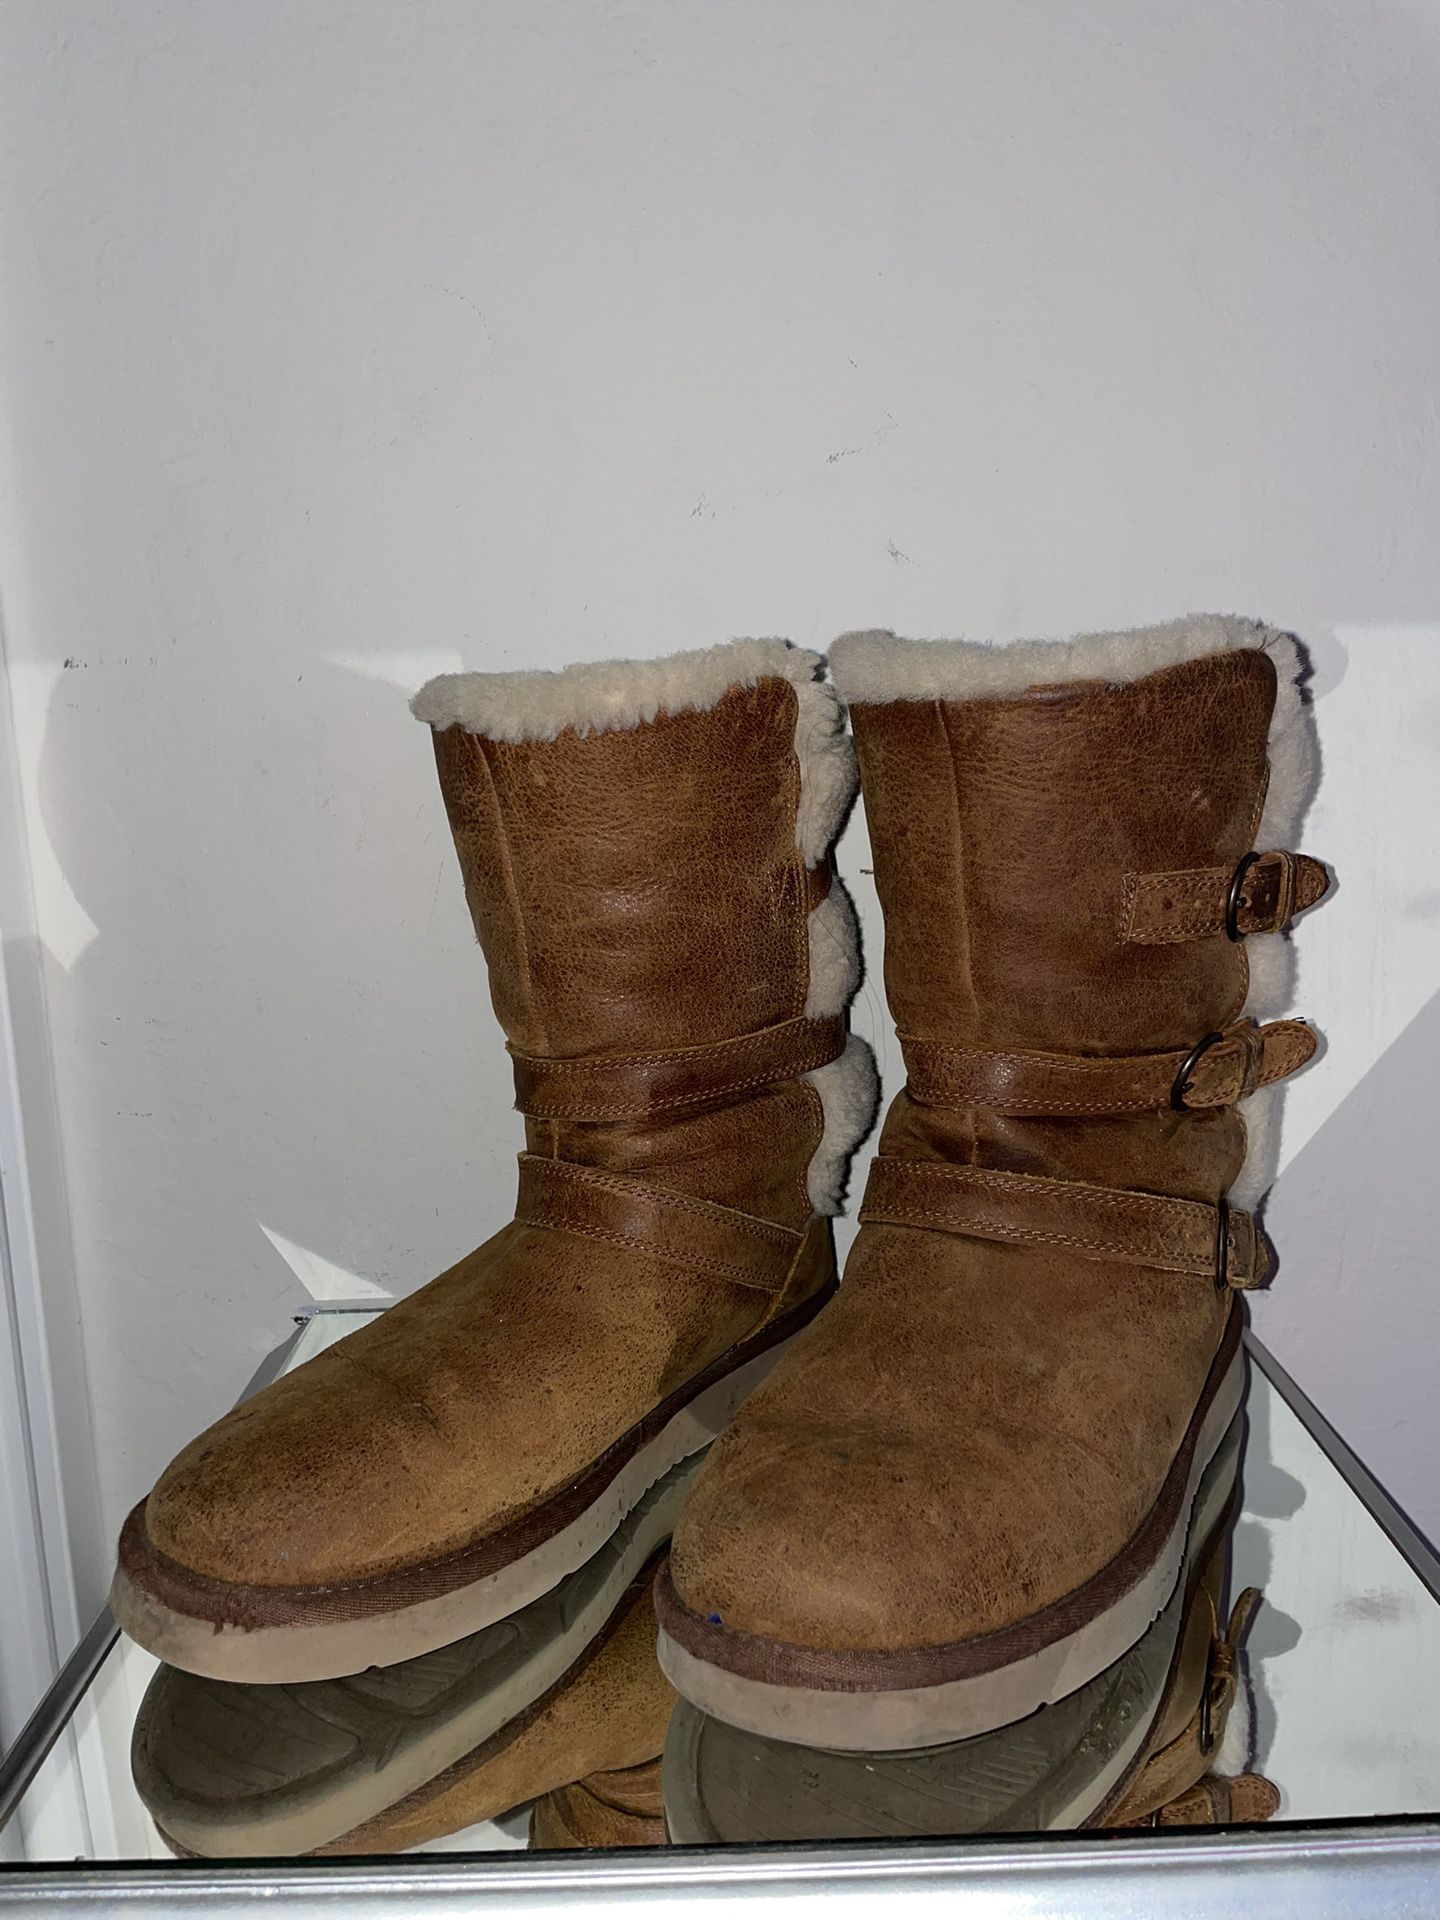 Ugg Limited Edition Boots Sold Out Size 9 Women